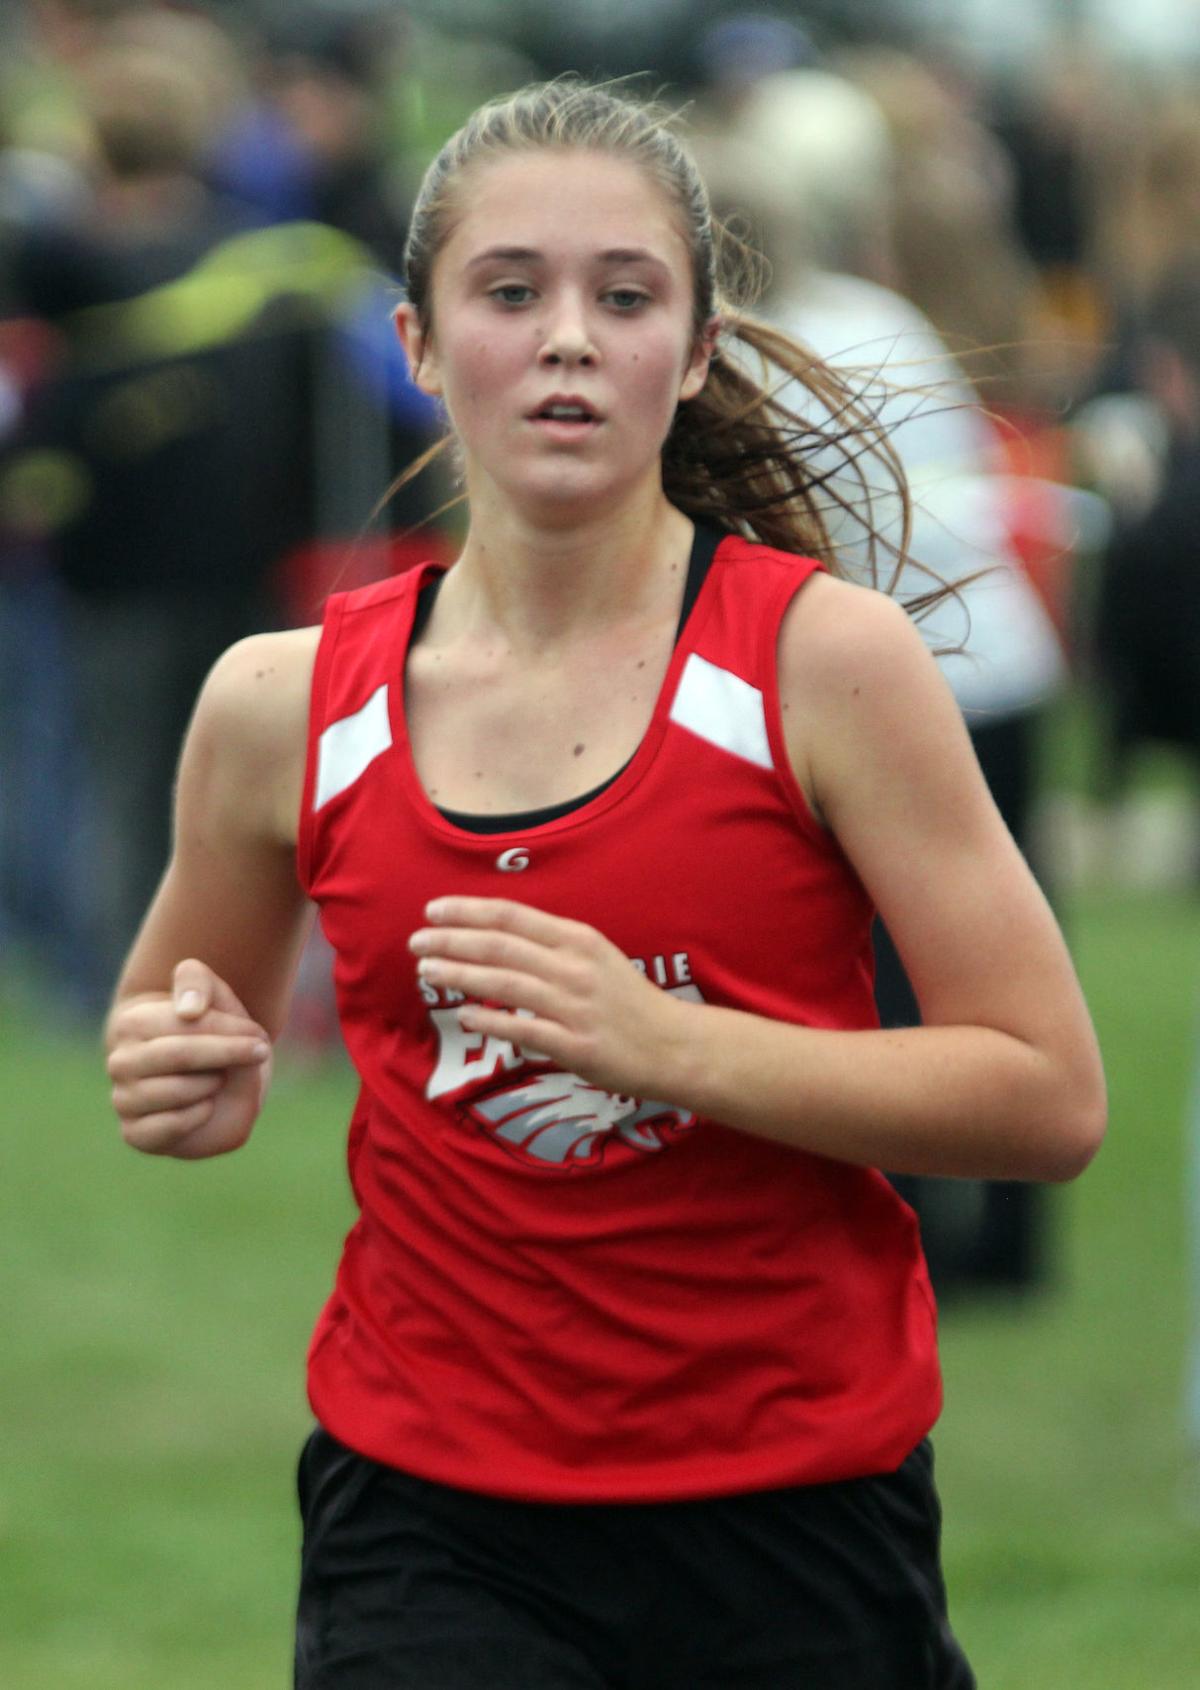 PREP CROSS COUNTRY: Sauk Prairie returns talented group for another run